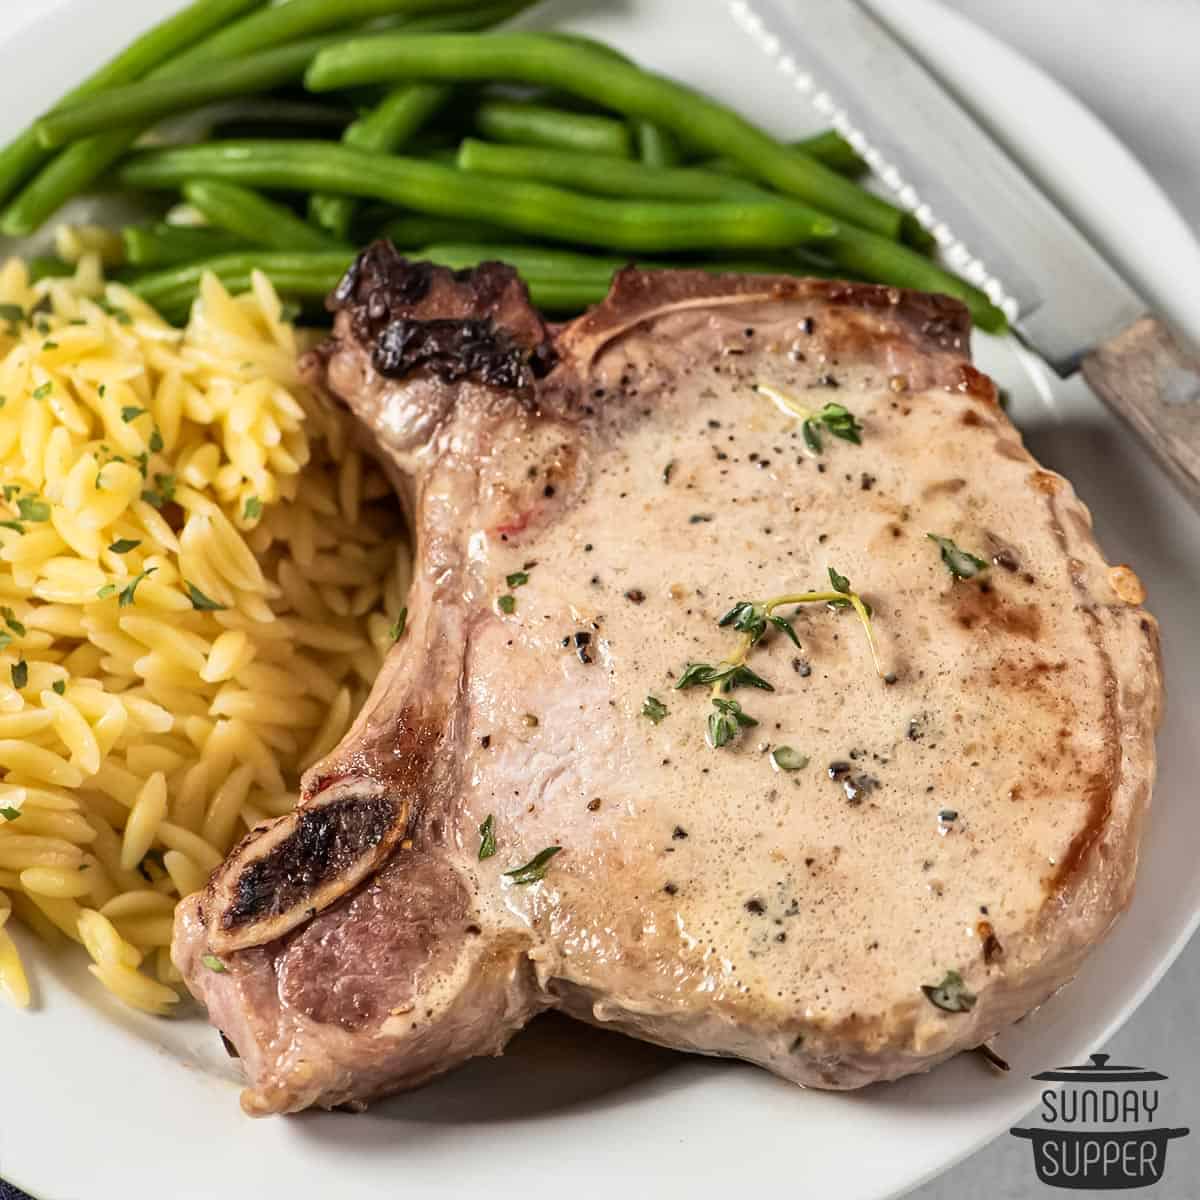 a cooked pork chop on a plate